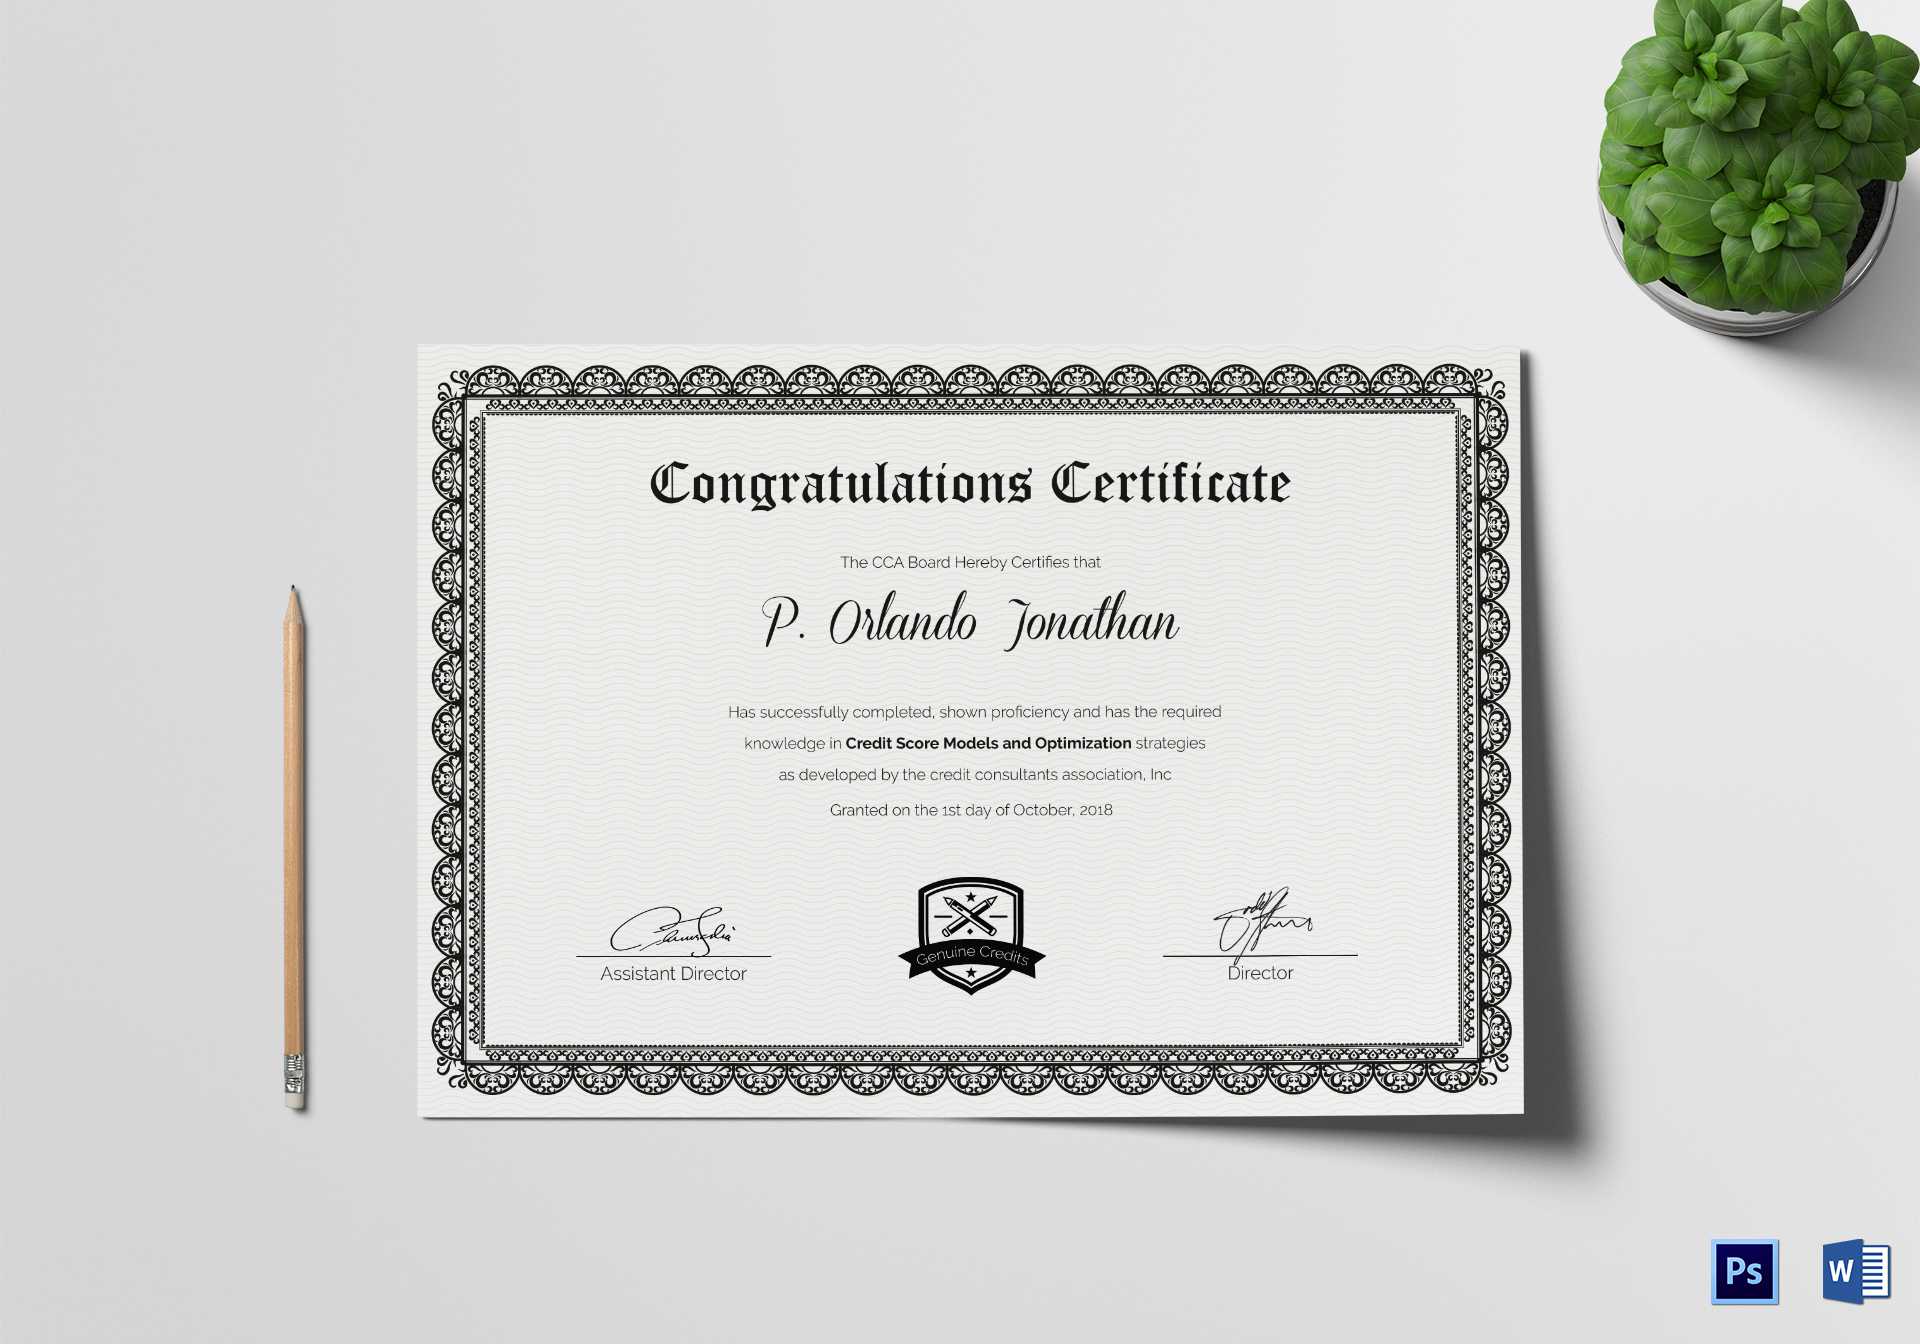 Congratulations Certificate Template With Regard To Congratulations Certificate Word Template